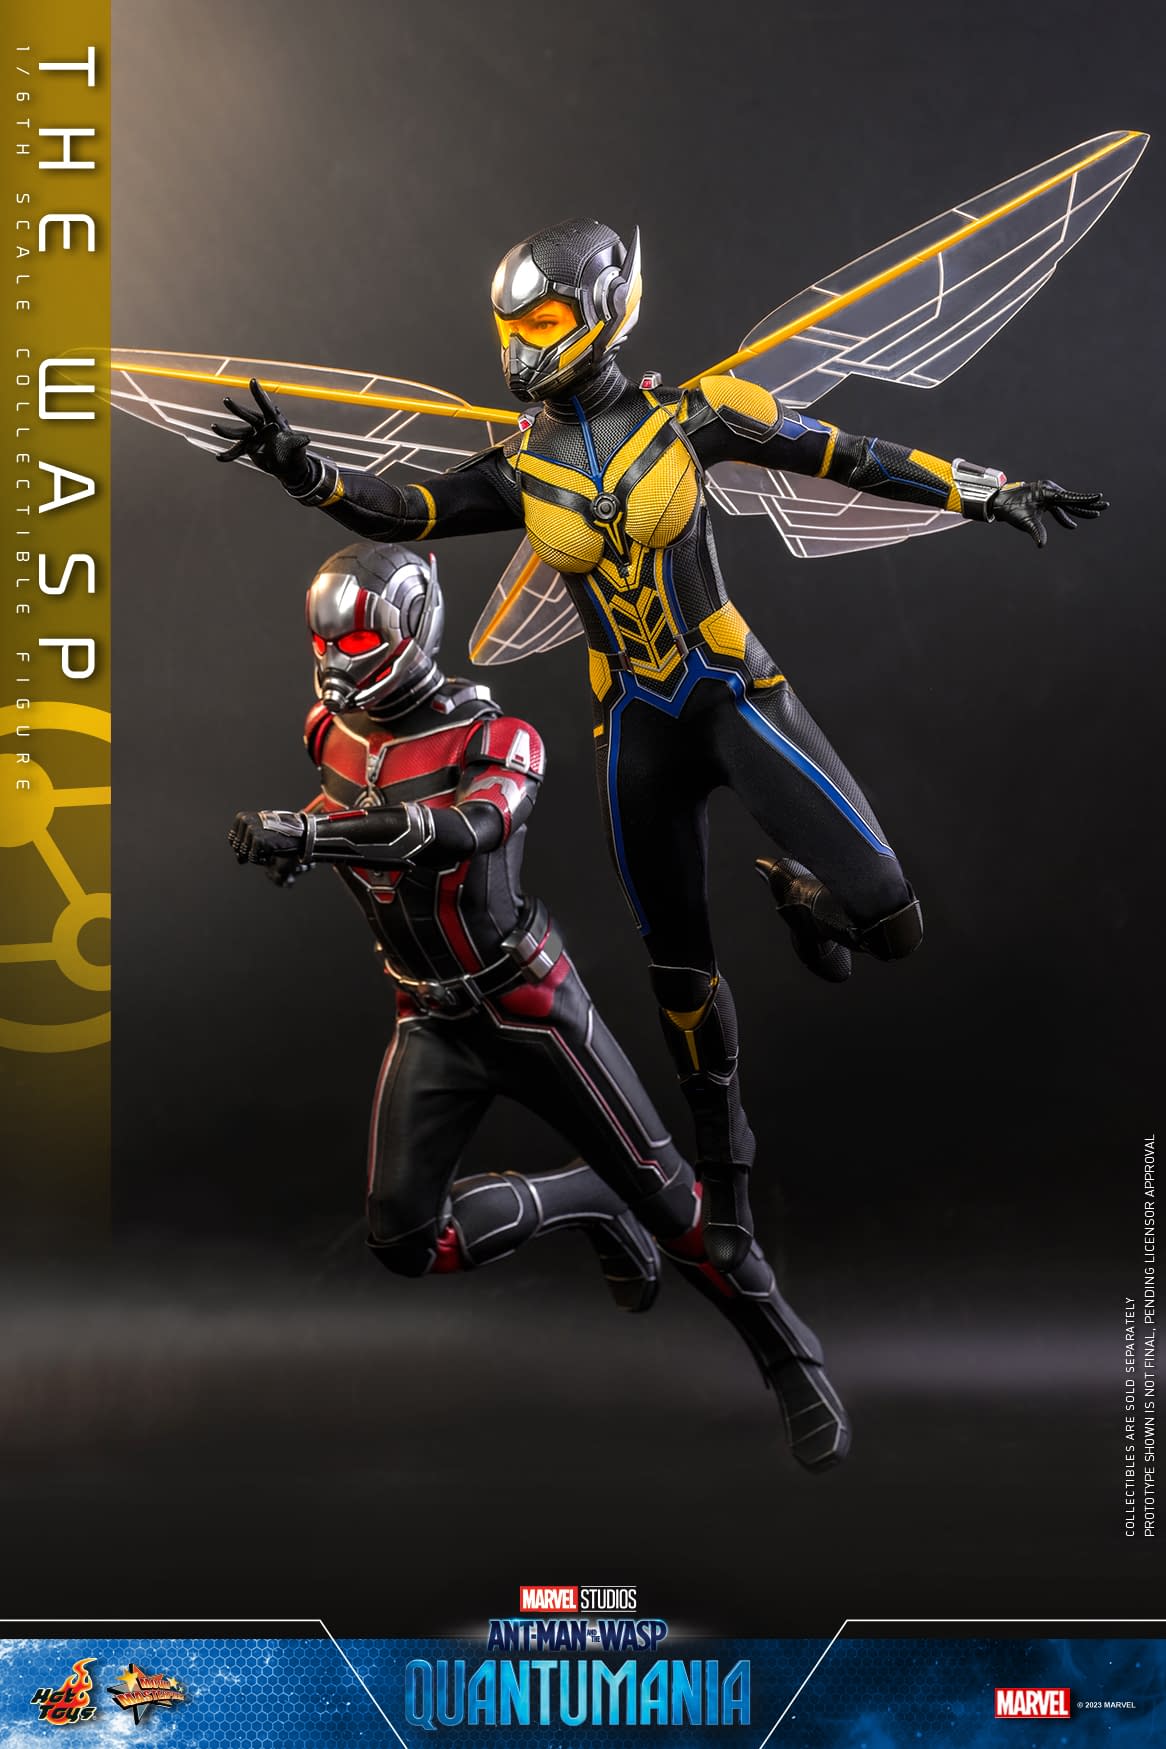 The Wasp Stings Hot Toys with Her Newest 1/6 Scale Ant-Man Figure